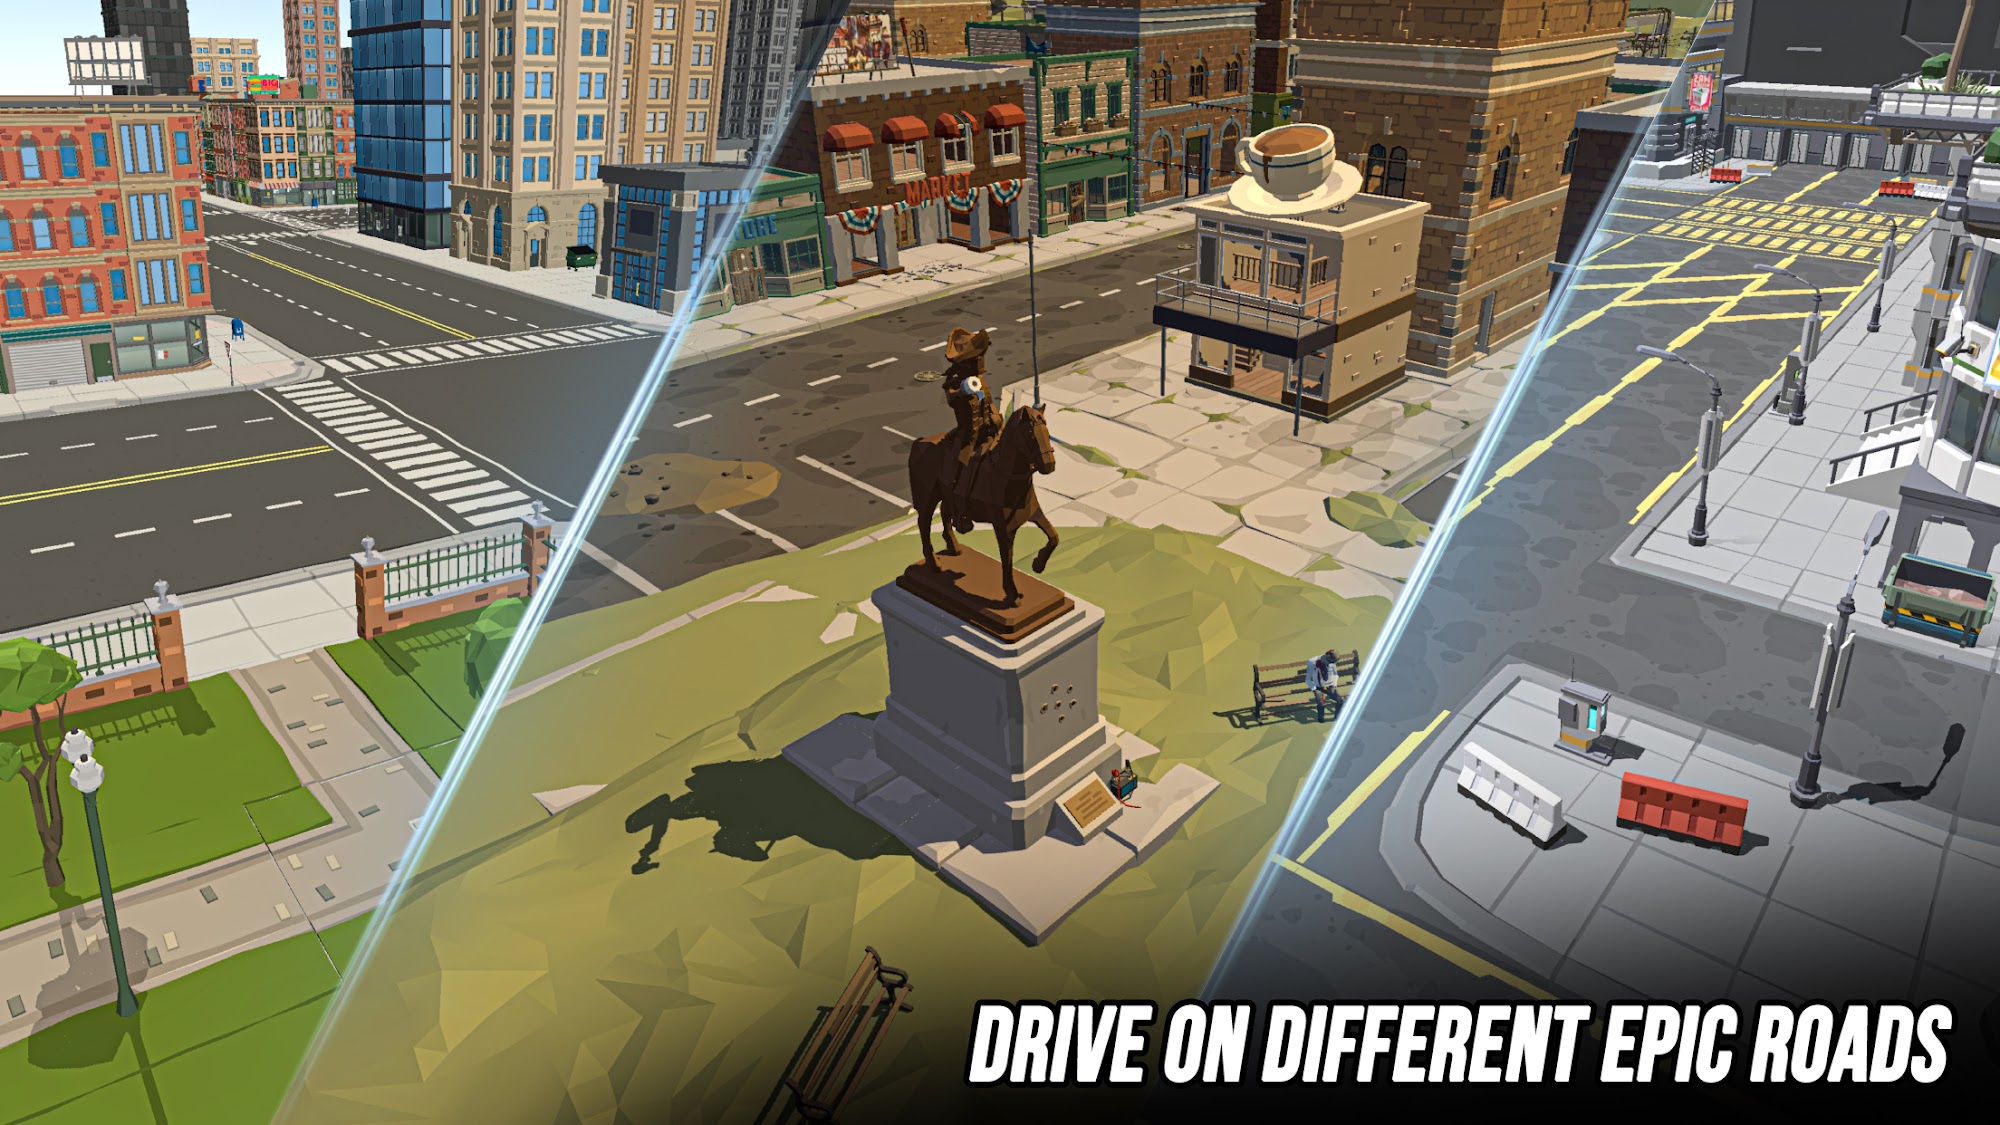 Scarica Chasing Fever: Car Chase Games gratis per Android.